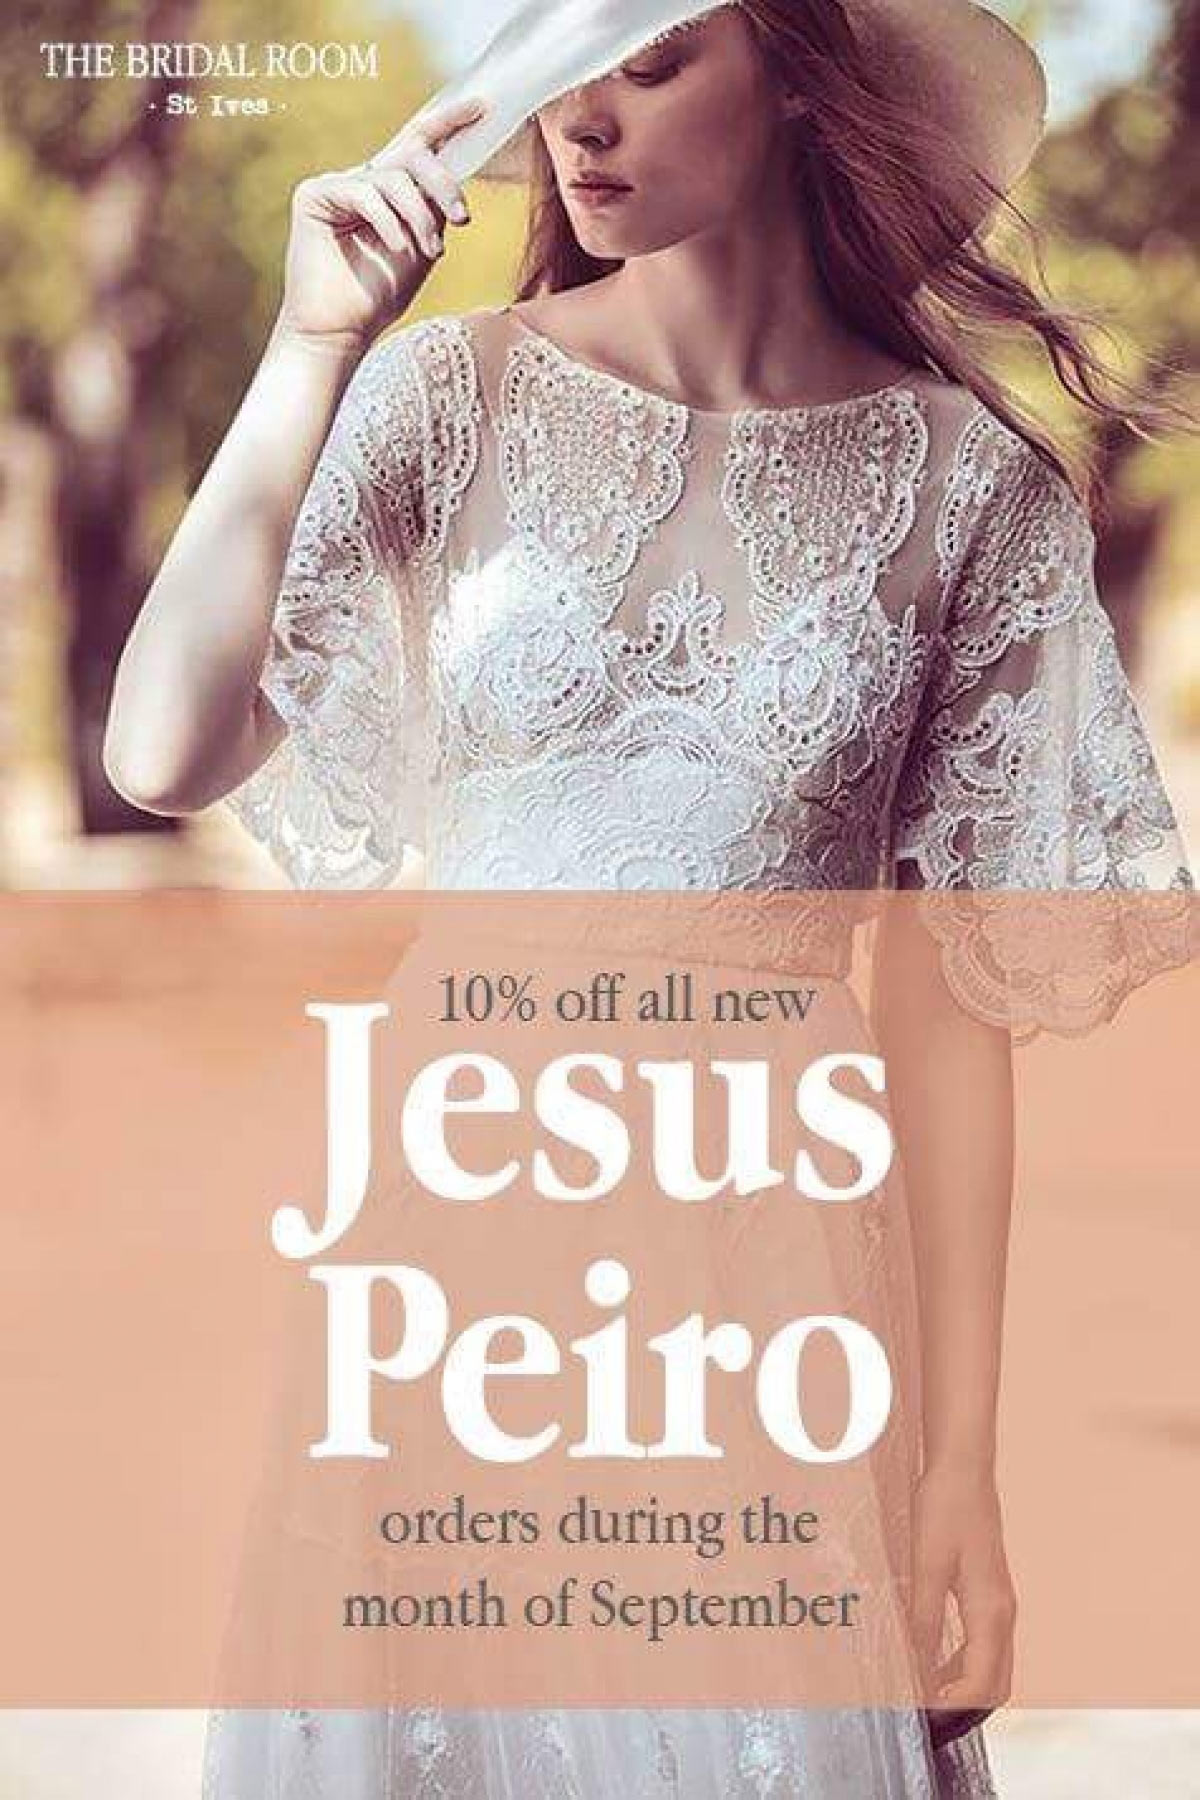 Get 10% off Jesus Peiro gowns at The Bridal Room St Ives